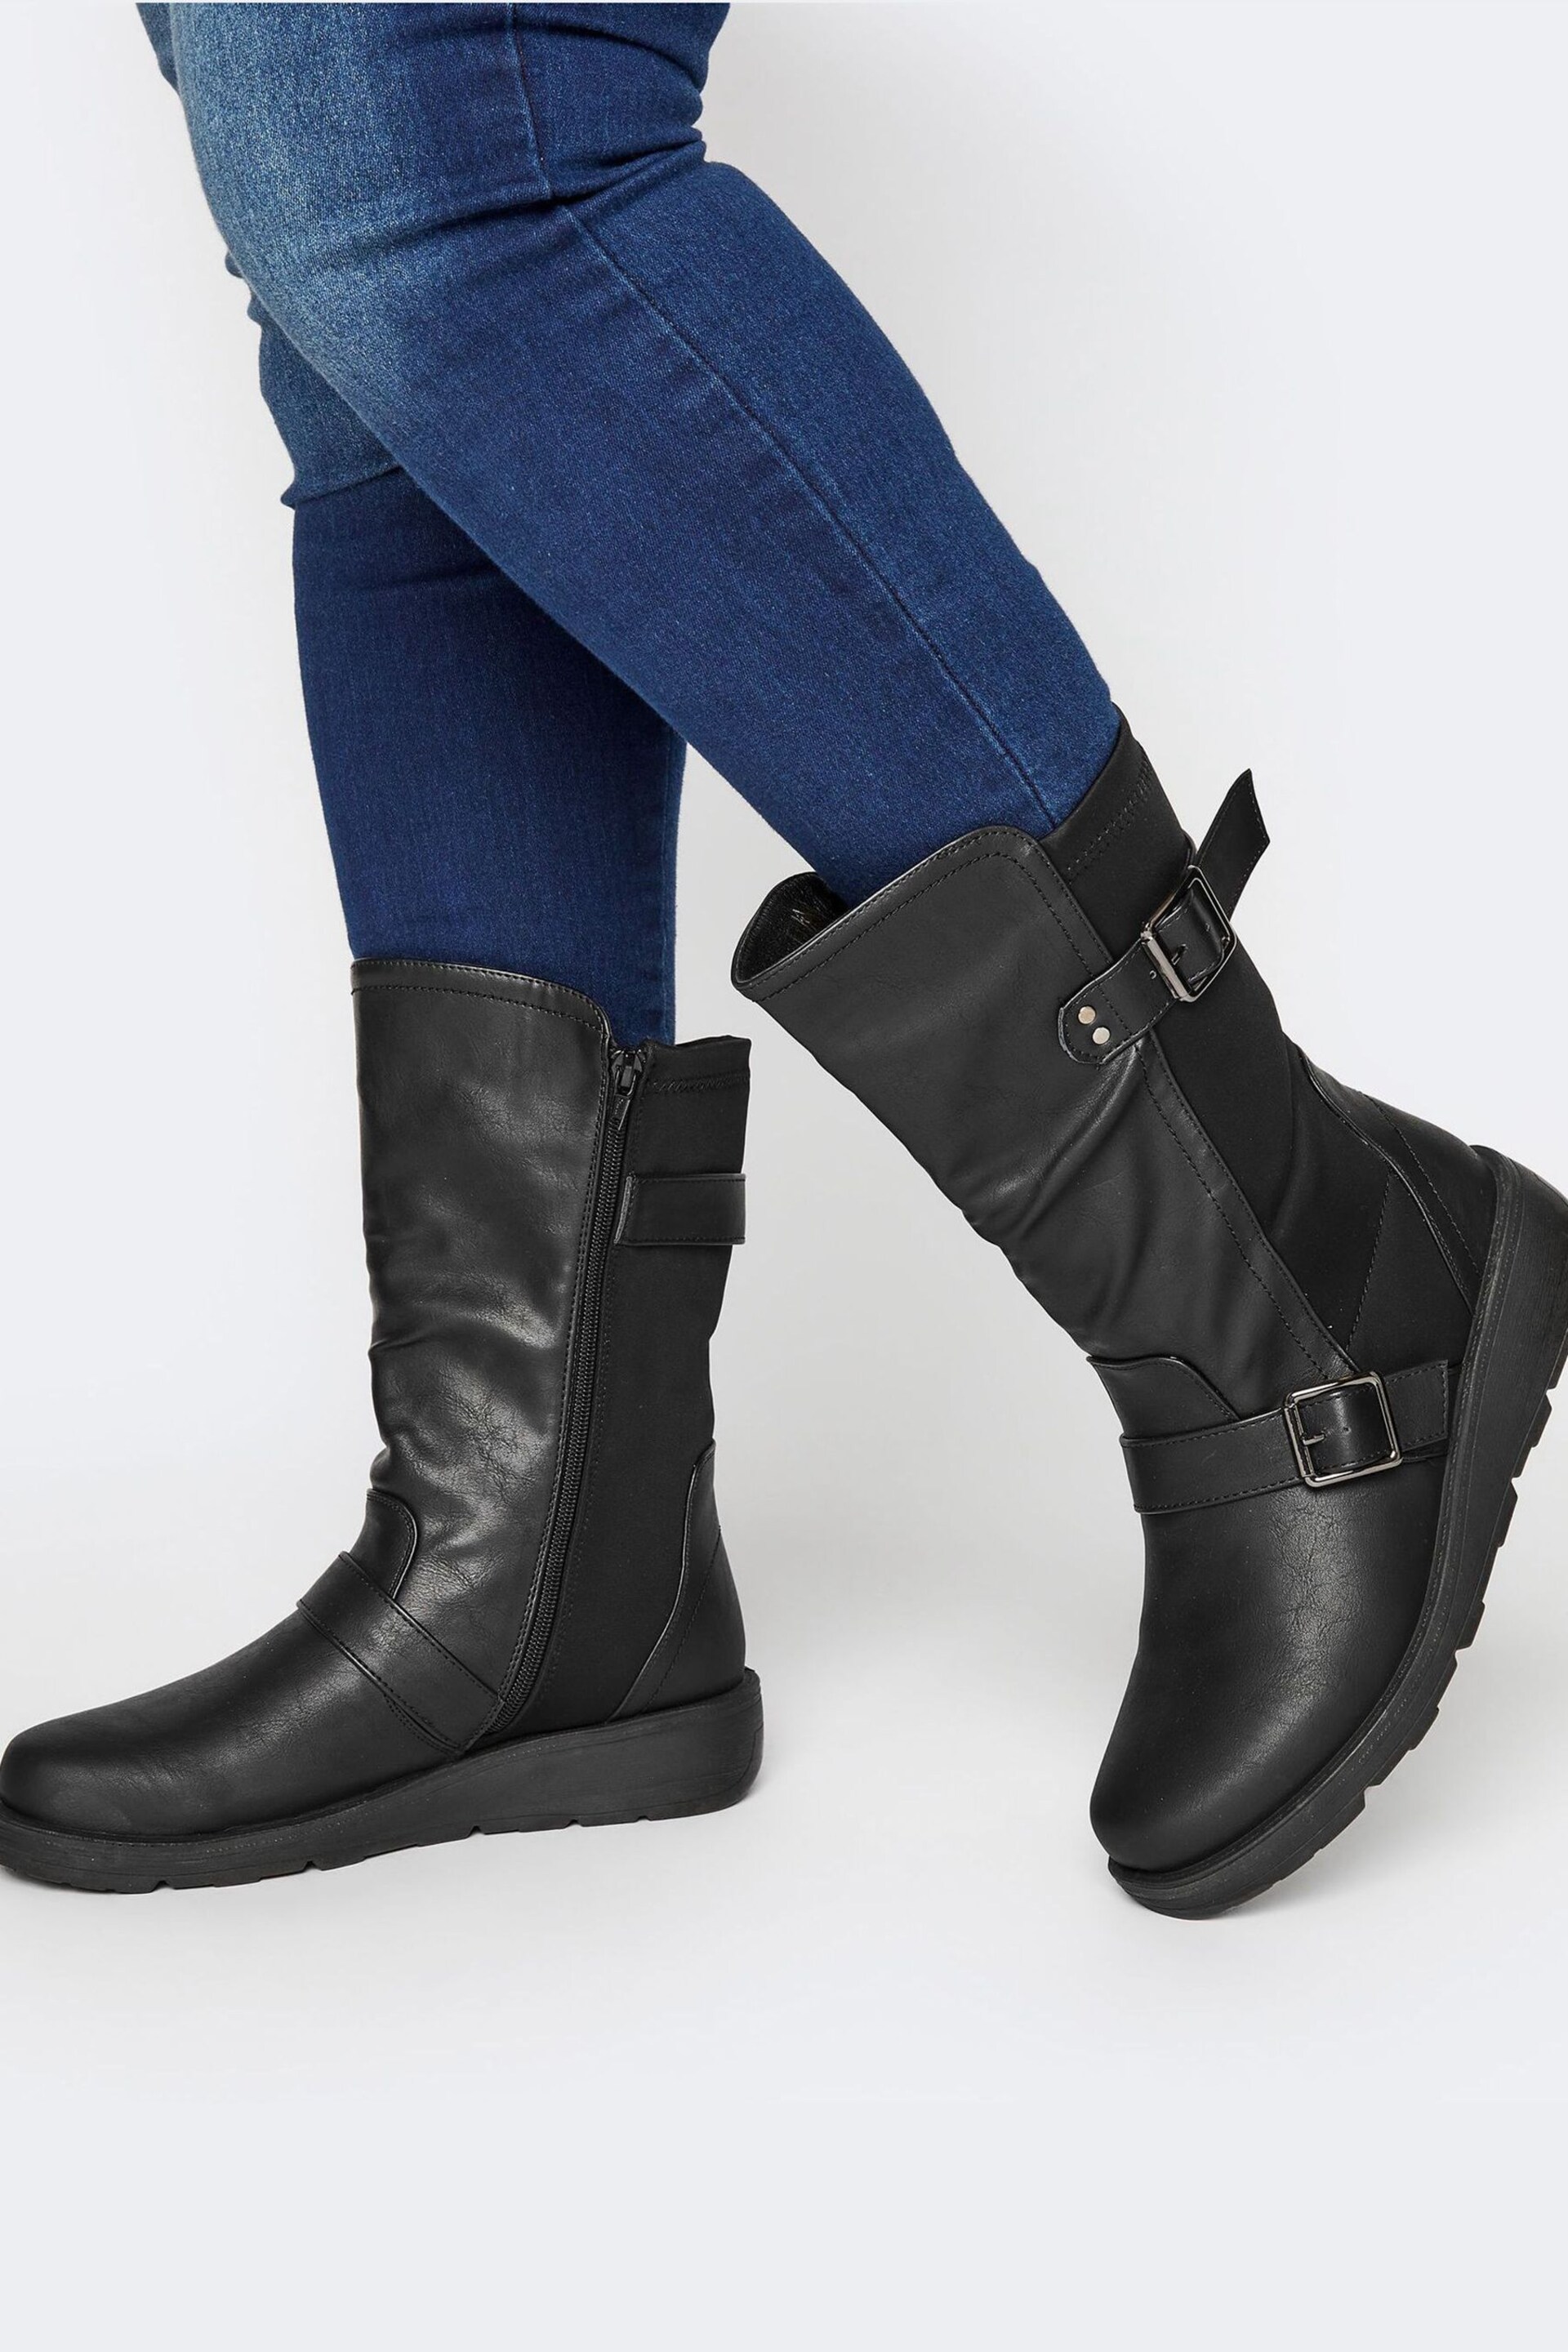 Yours Curve Black Extra Wide Fit Low Wedge Buckle Boots - Image 1 of 4